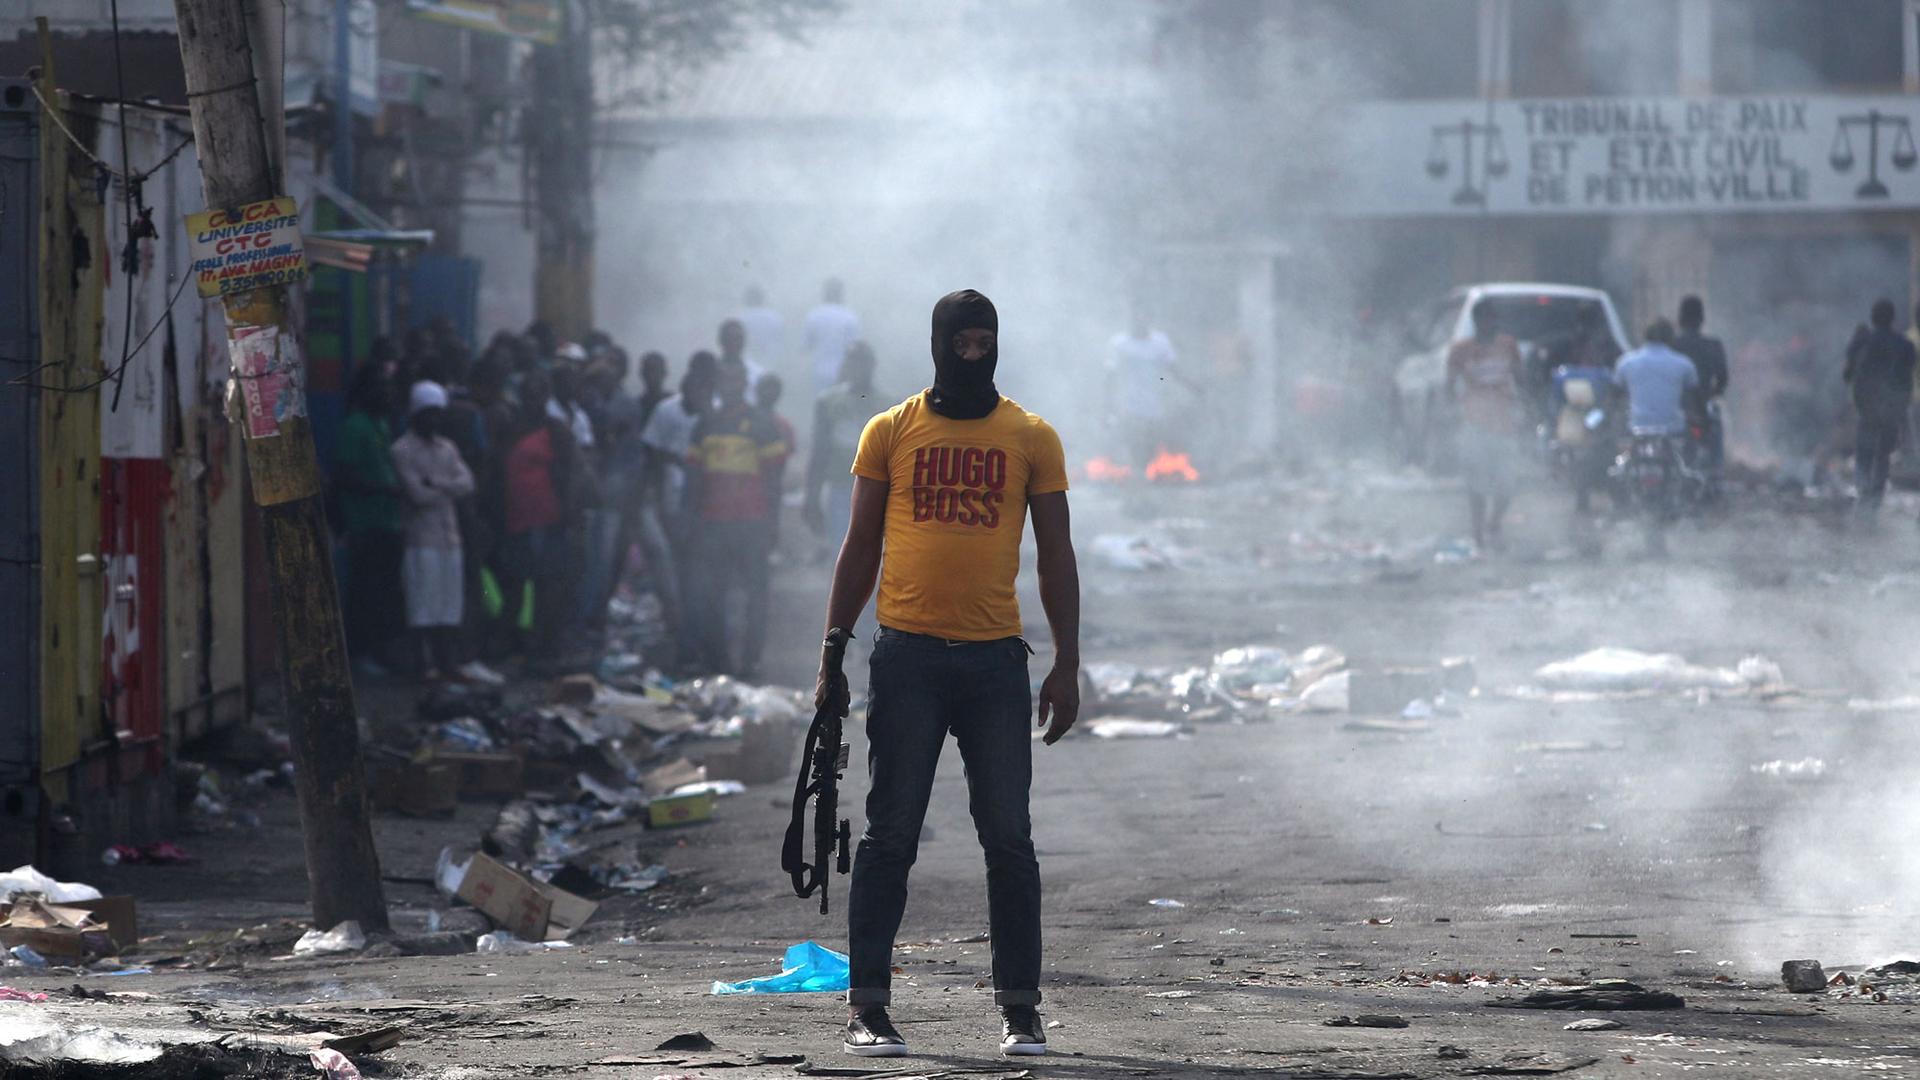 A man is shown holding a weapon, wearing a yellow Hugo Boss t-shirt, next to burning barricades.